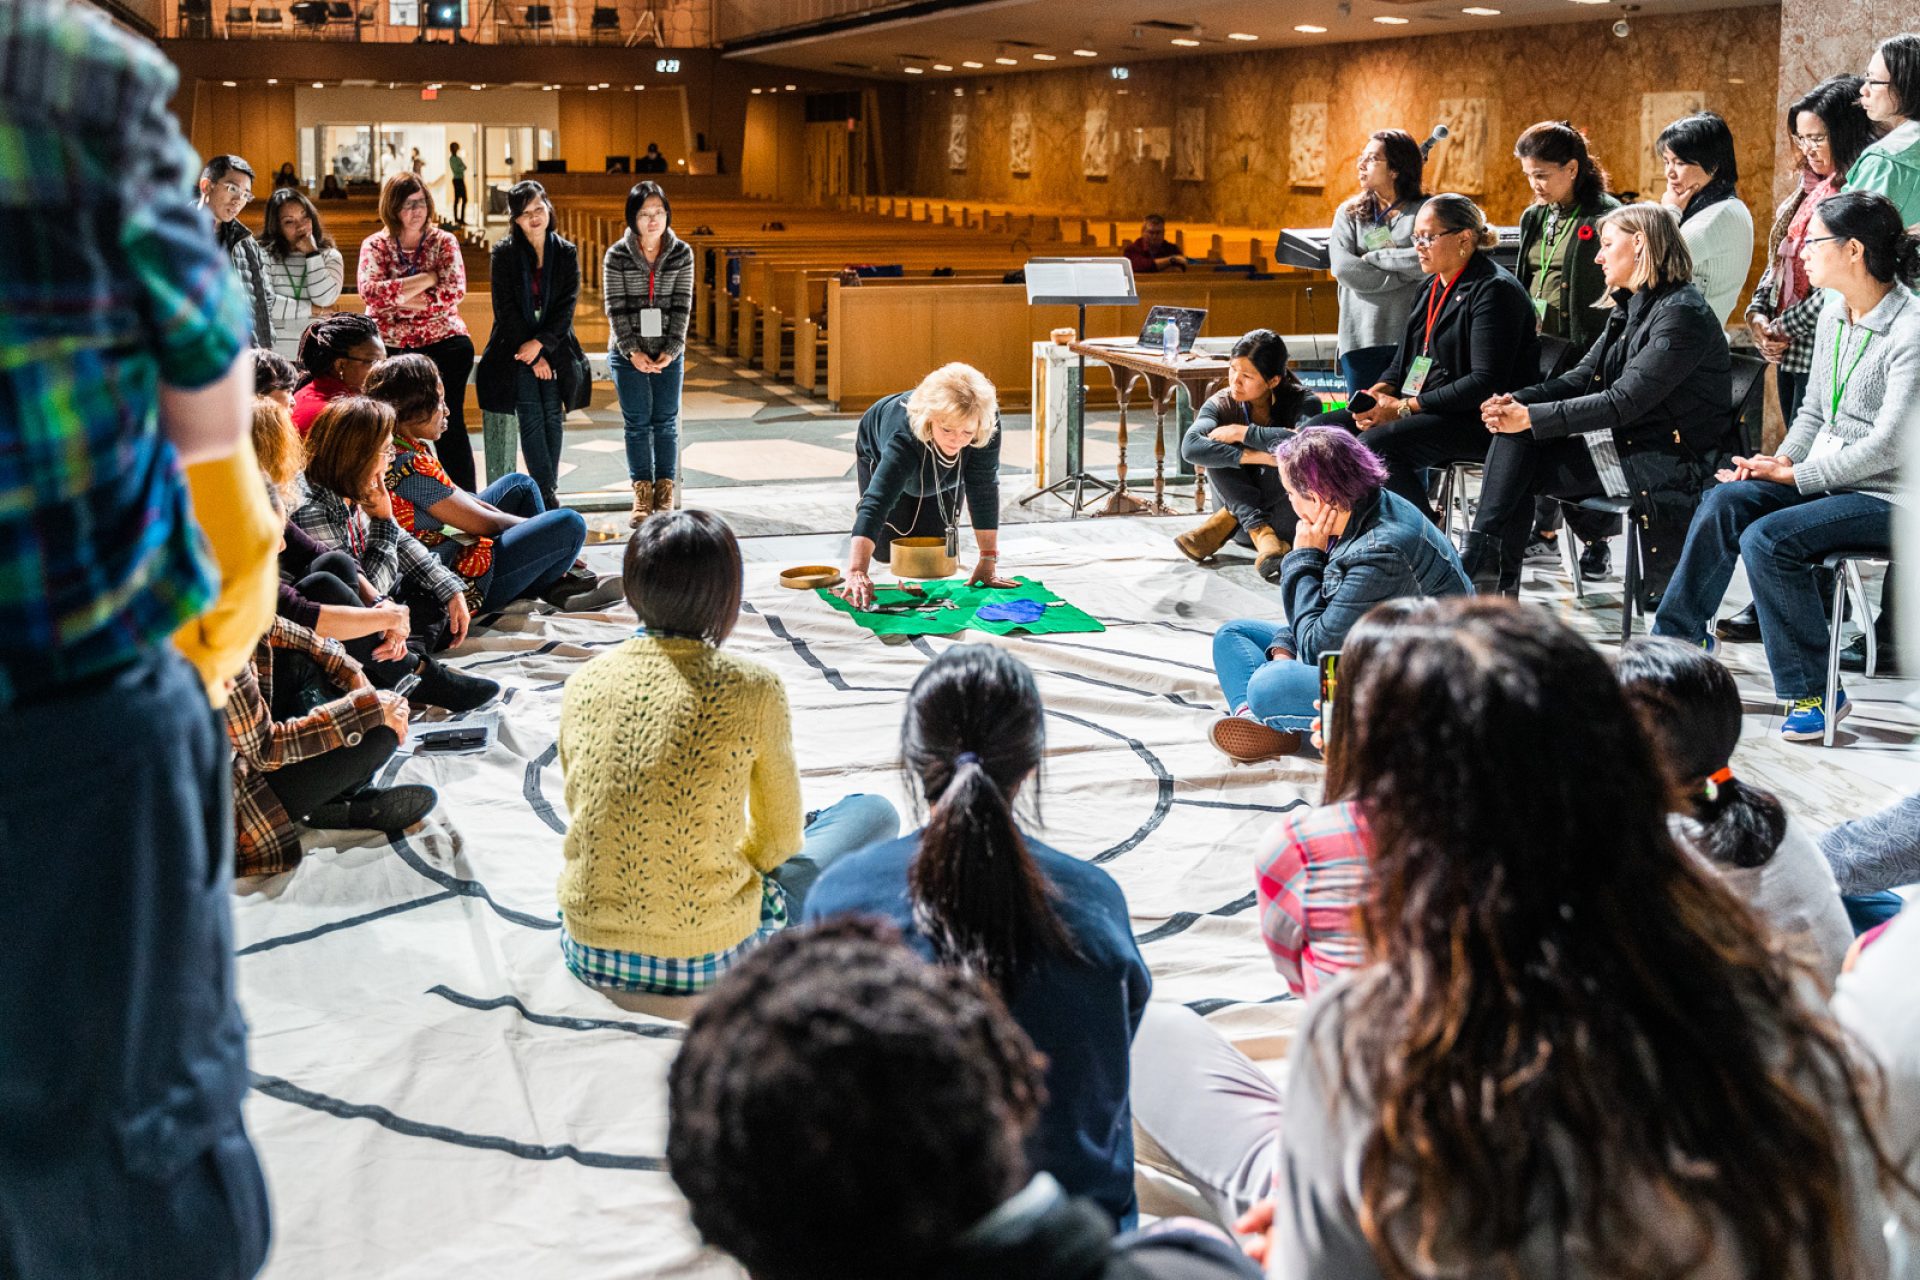 A woman leads a classroom in an illustration. They all sit in a circle around her on the floor as the lays out building blocks.